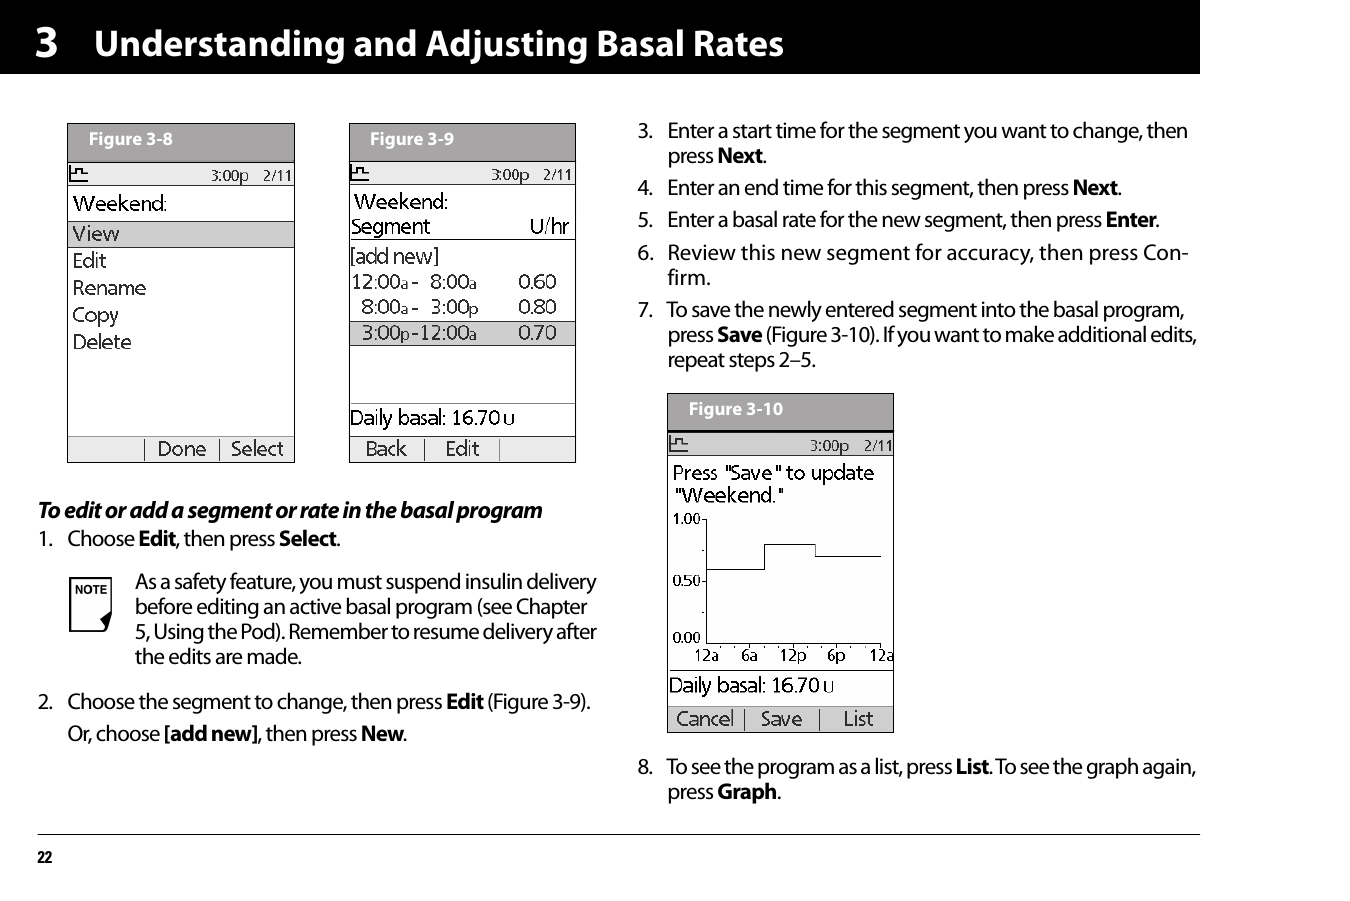 Understanding and Adjusting Basal Rates223To edit or add a segment or rate in the basal program1. Choose Edit, then press Select. 2. Choose the segment to change, then press Edit (Figure 3-9).Or, choose [add new], then press New.3. Enter a start time for the segment you want to change, then press Next.4. Enter an end time for this segment, then press Next.5. Enter a basal rate for the new segment, then press Enter.6. Review this new segment for accuracy, then press Con-firm.7. To save the newly entered segment into the basal program, press Save (Figure 3-10). If you want to make additional edits, repeat steps 2–5. 8. To see the program as a list, press List. To see the graph again, press Graph.As a safety feature, you must suspend insulin delivery before editing an active basal program (see Chapter 5, Using the Pod). Remember to resume delivery after the edits are made.Figure 3-8 Figure 3-9Figure 3-10